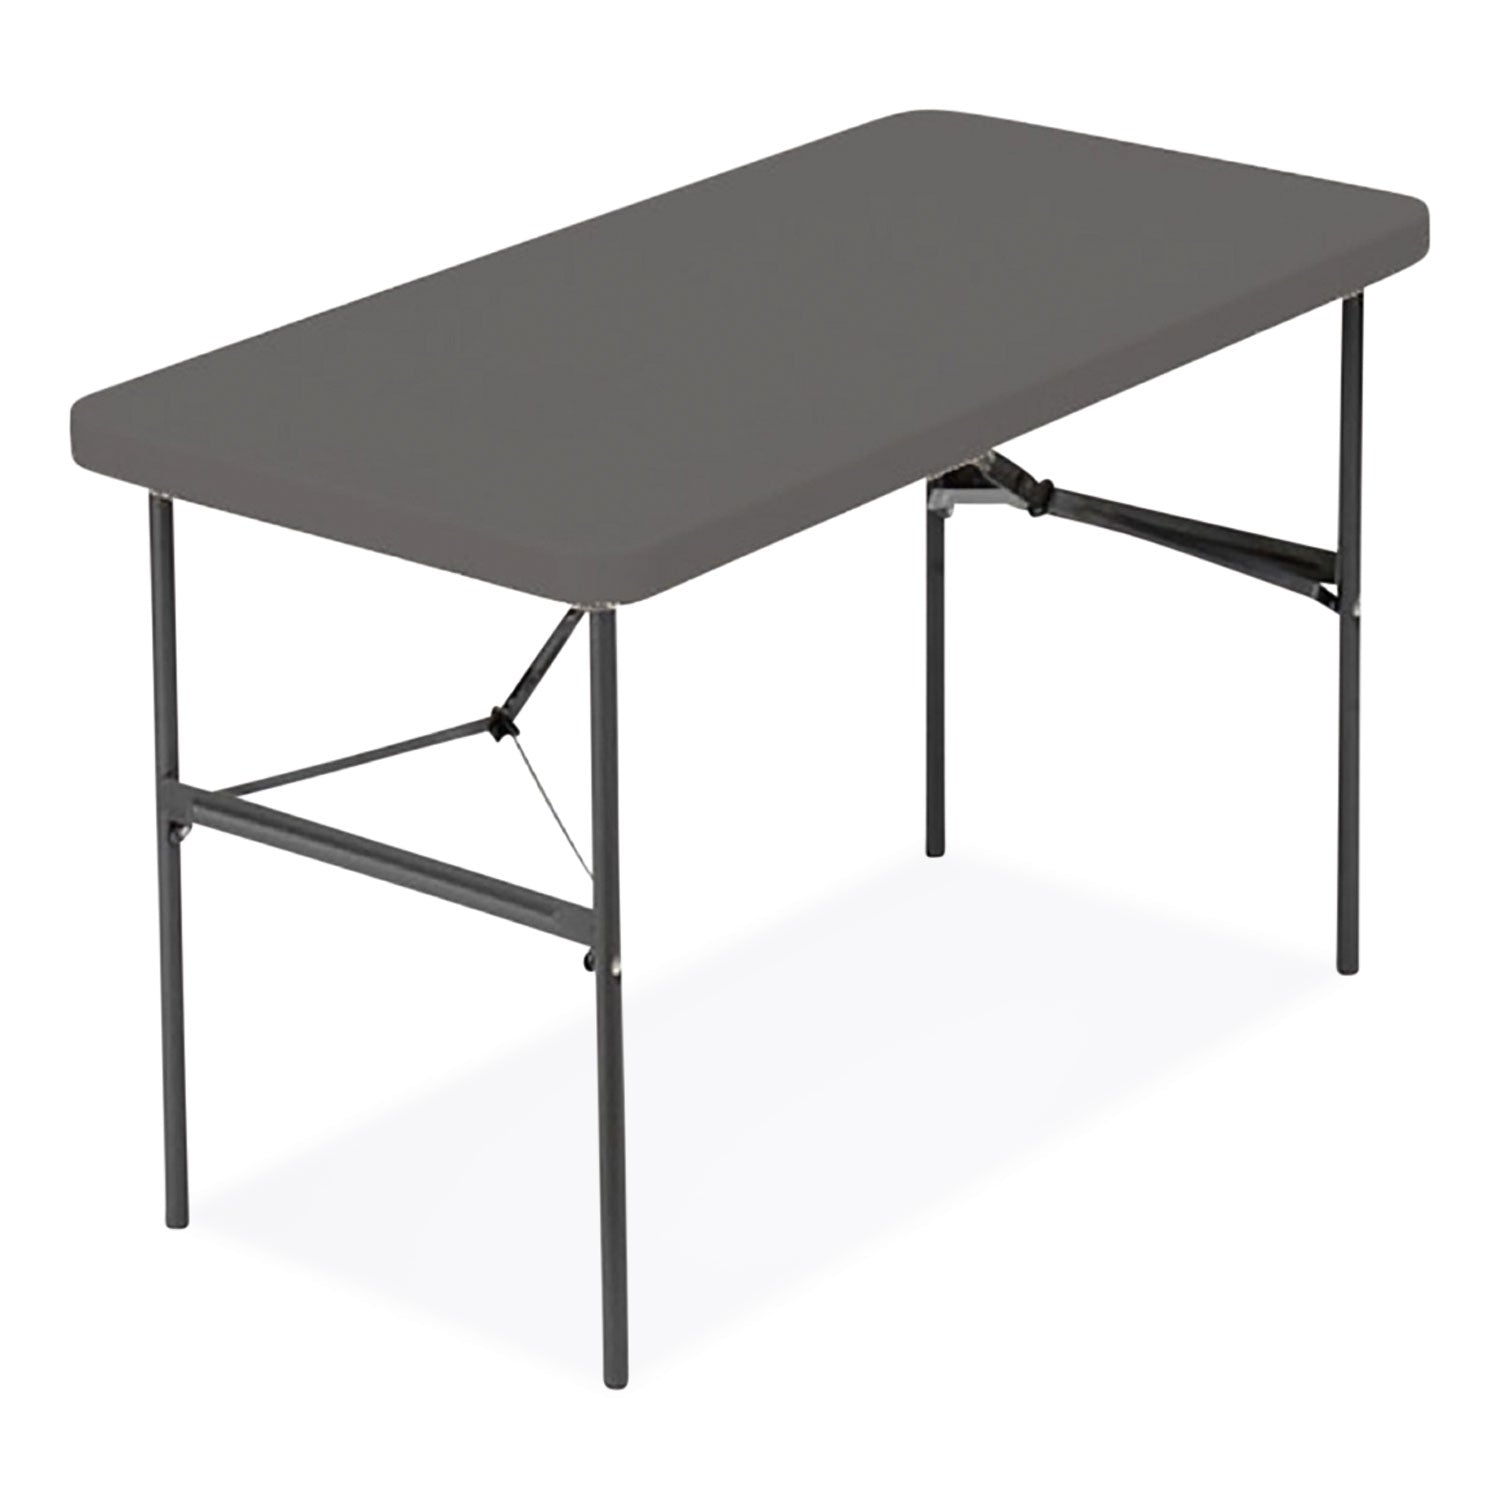 indestructable-commercial-folding-table-rectangular-48-x-24-x-29-charcoal-top-charcoal-base-legs_ice65507 - 2